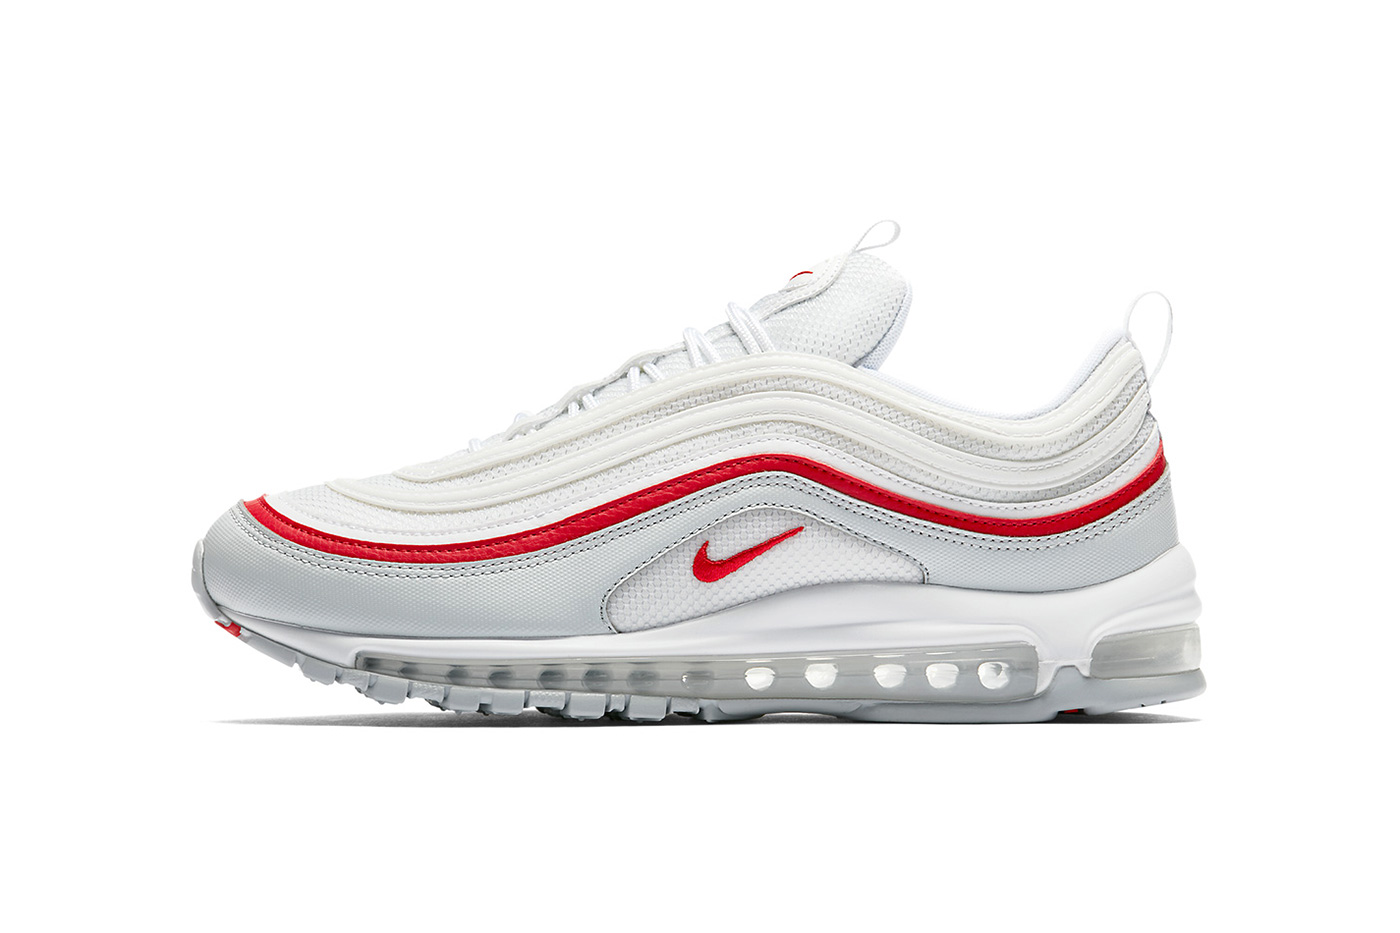 red 97's